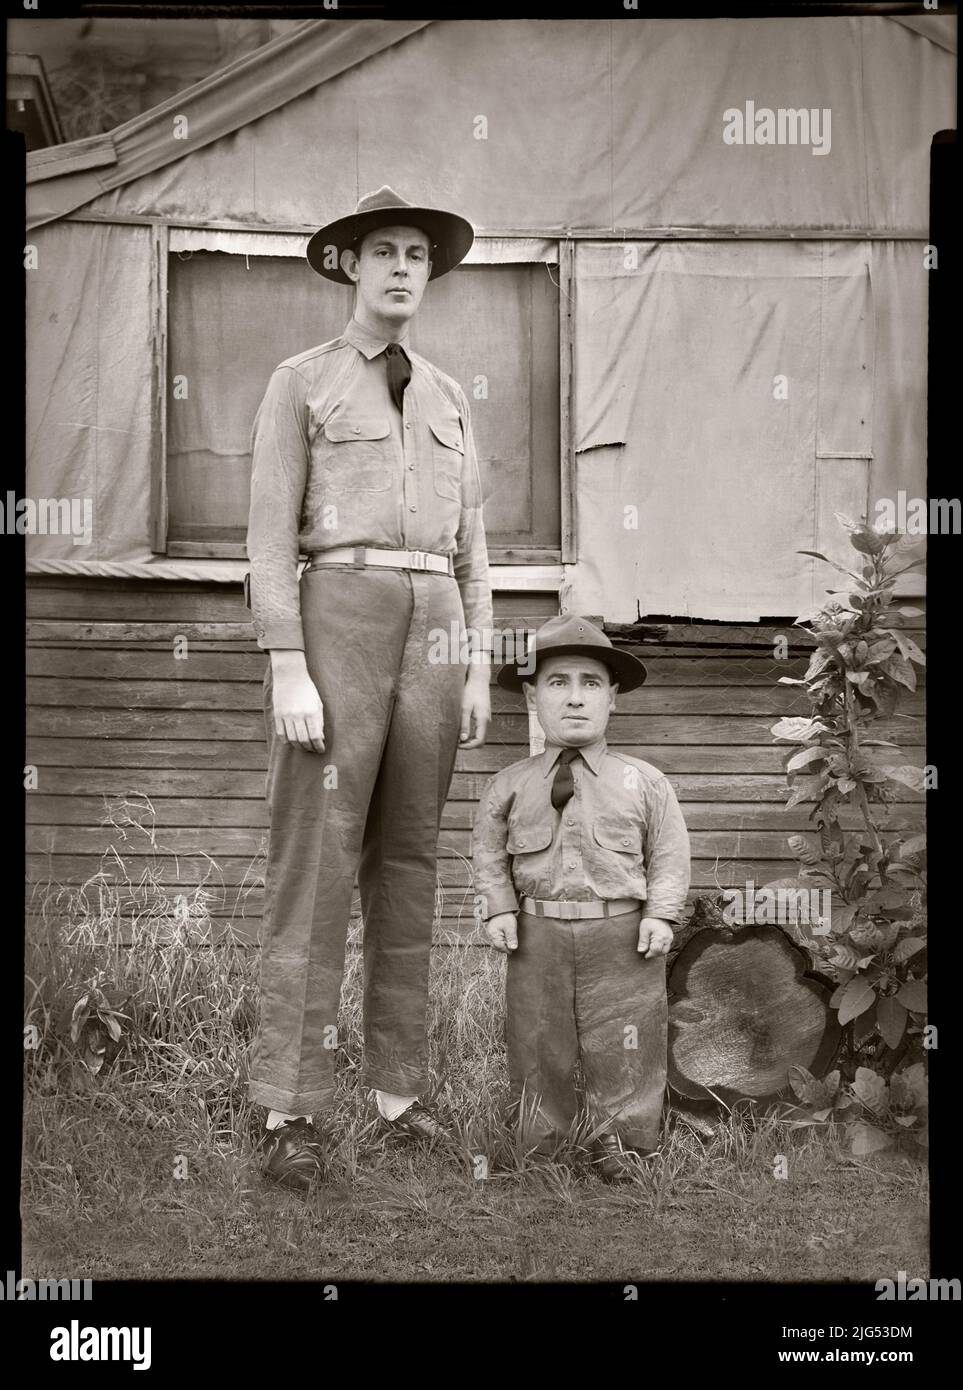 Tall and short soldiers of WW1. Image from 4.75 x 6.75 inch negative. Stock Photo